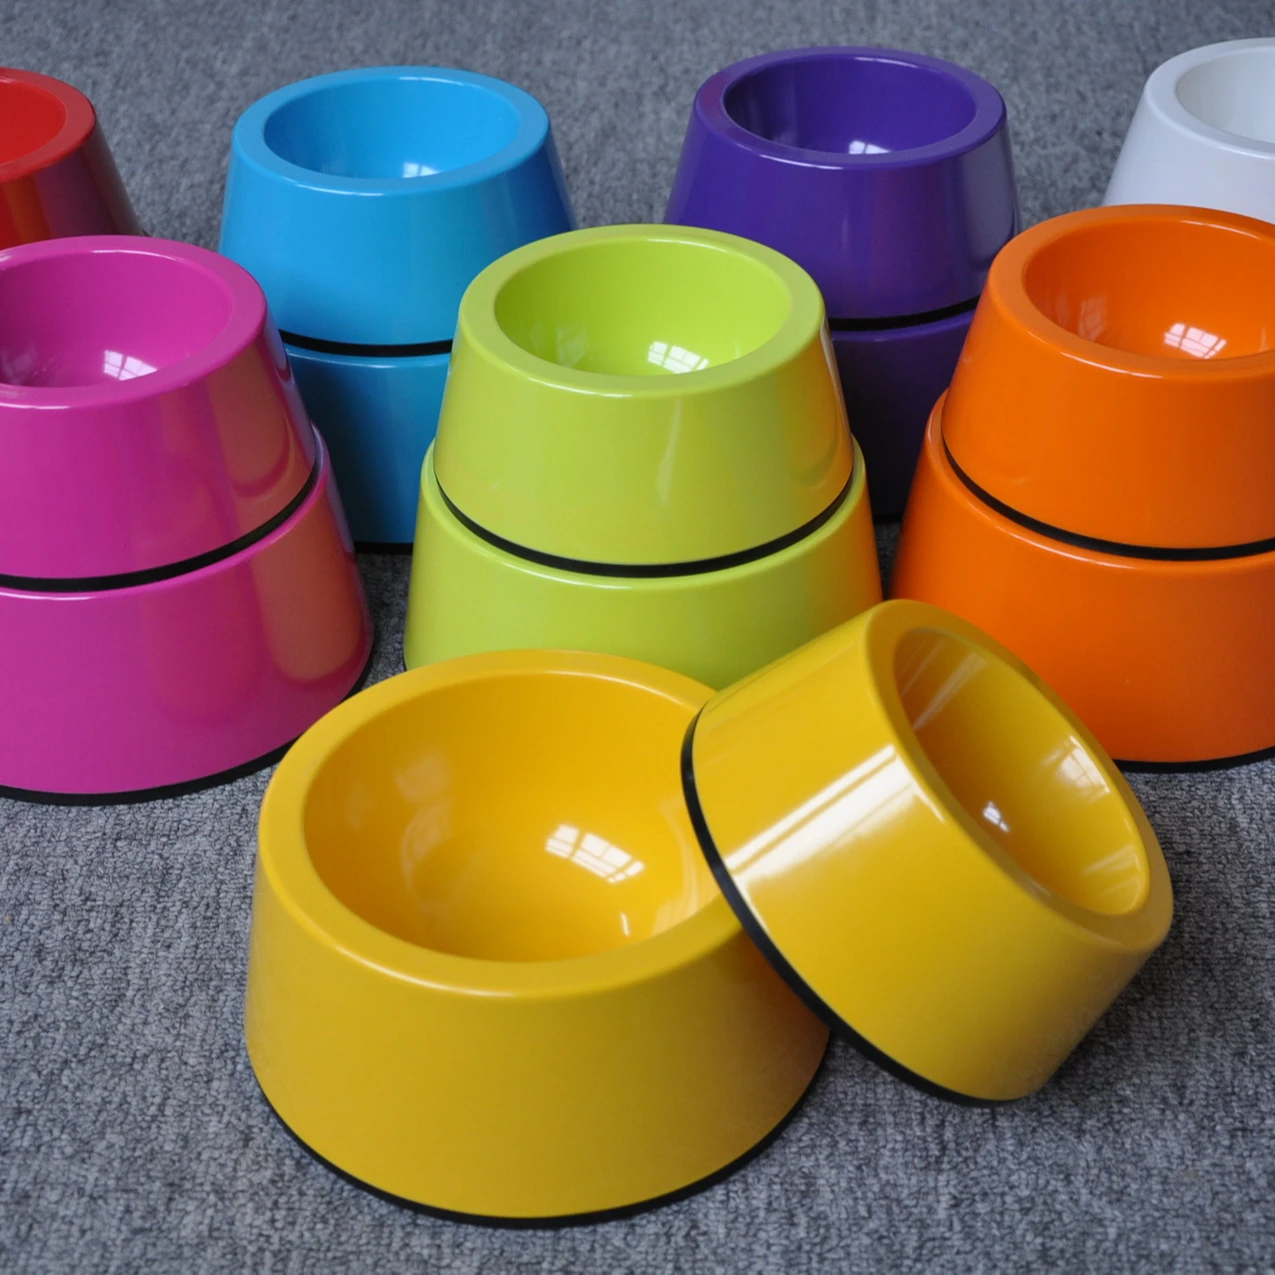 

Wholesale Eco-friendly Non-toxic Anti-Overflow Rounded Pet Puppy Cat Dog Bowl Non-Slip Little Pet Food Water Feed Dish, Violet/red/blue/green/orange/yellow/plum/white